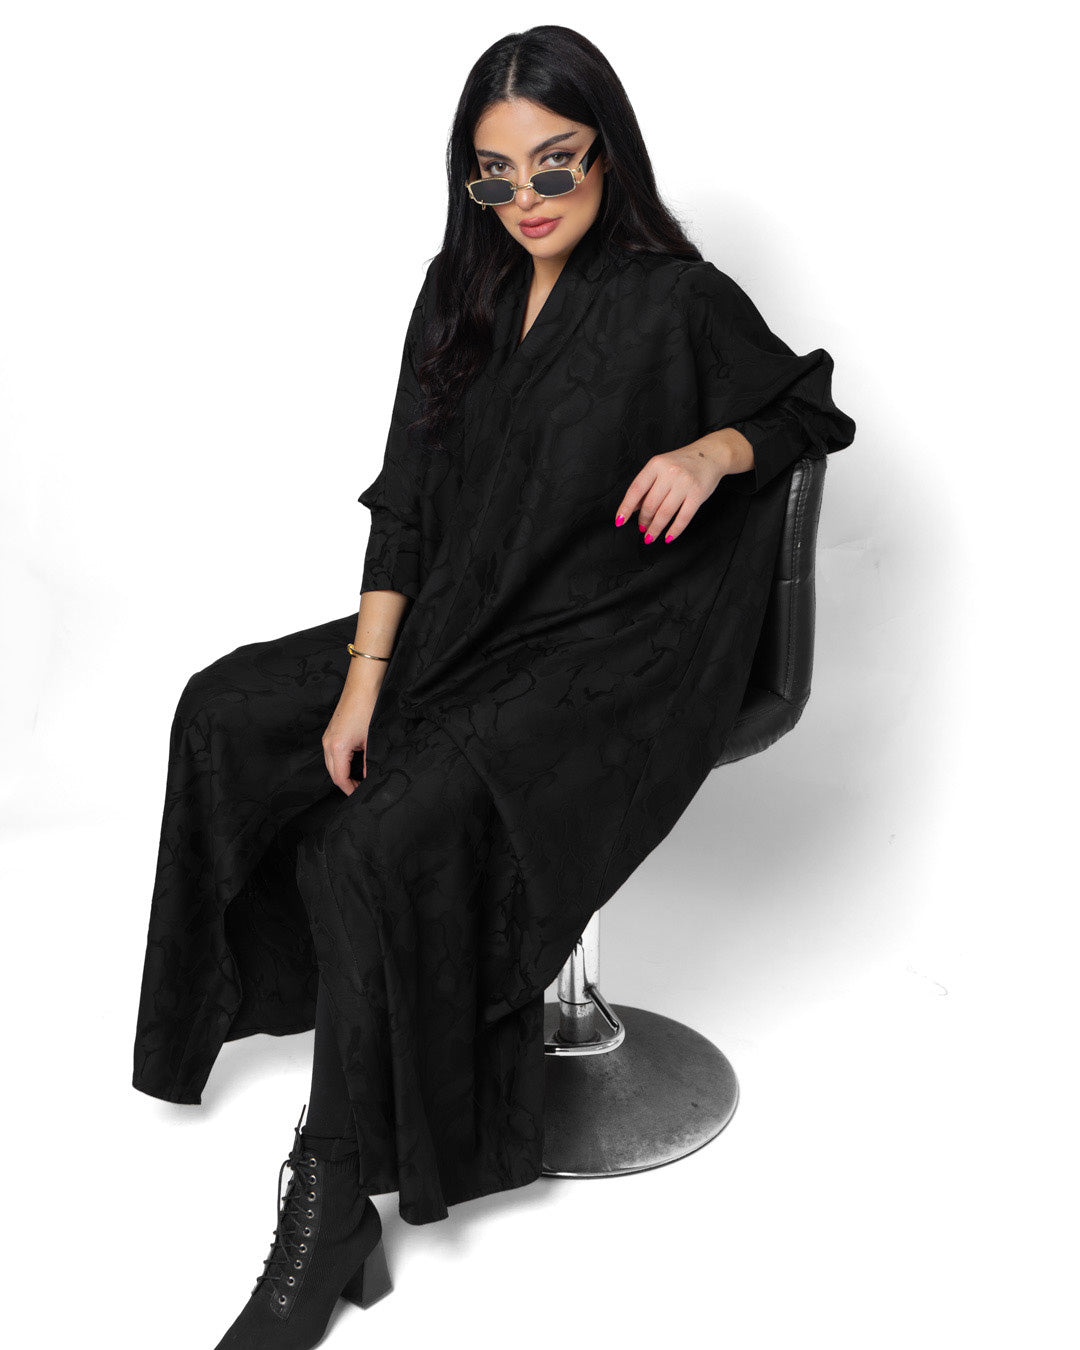 BL-0185 Abaya wide model, Black colour with designs